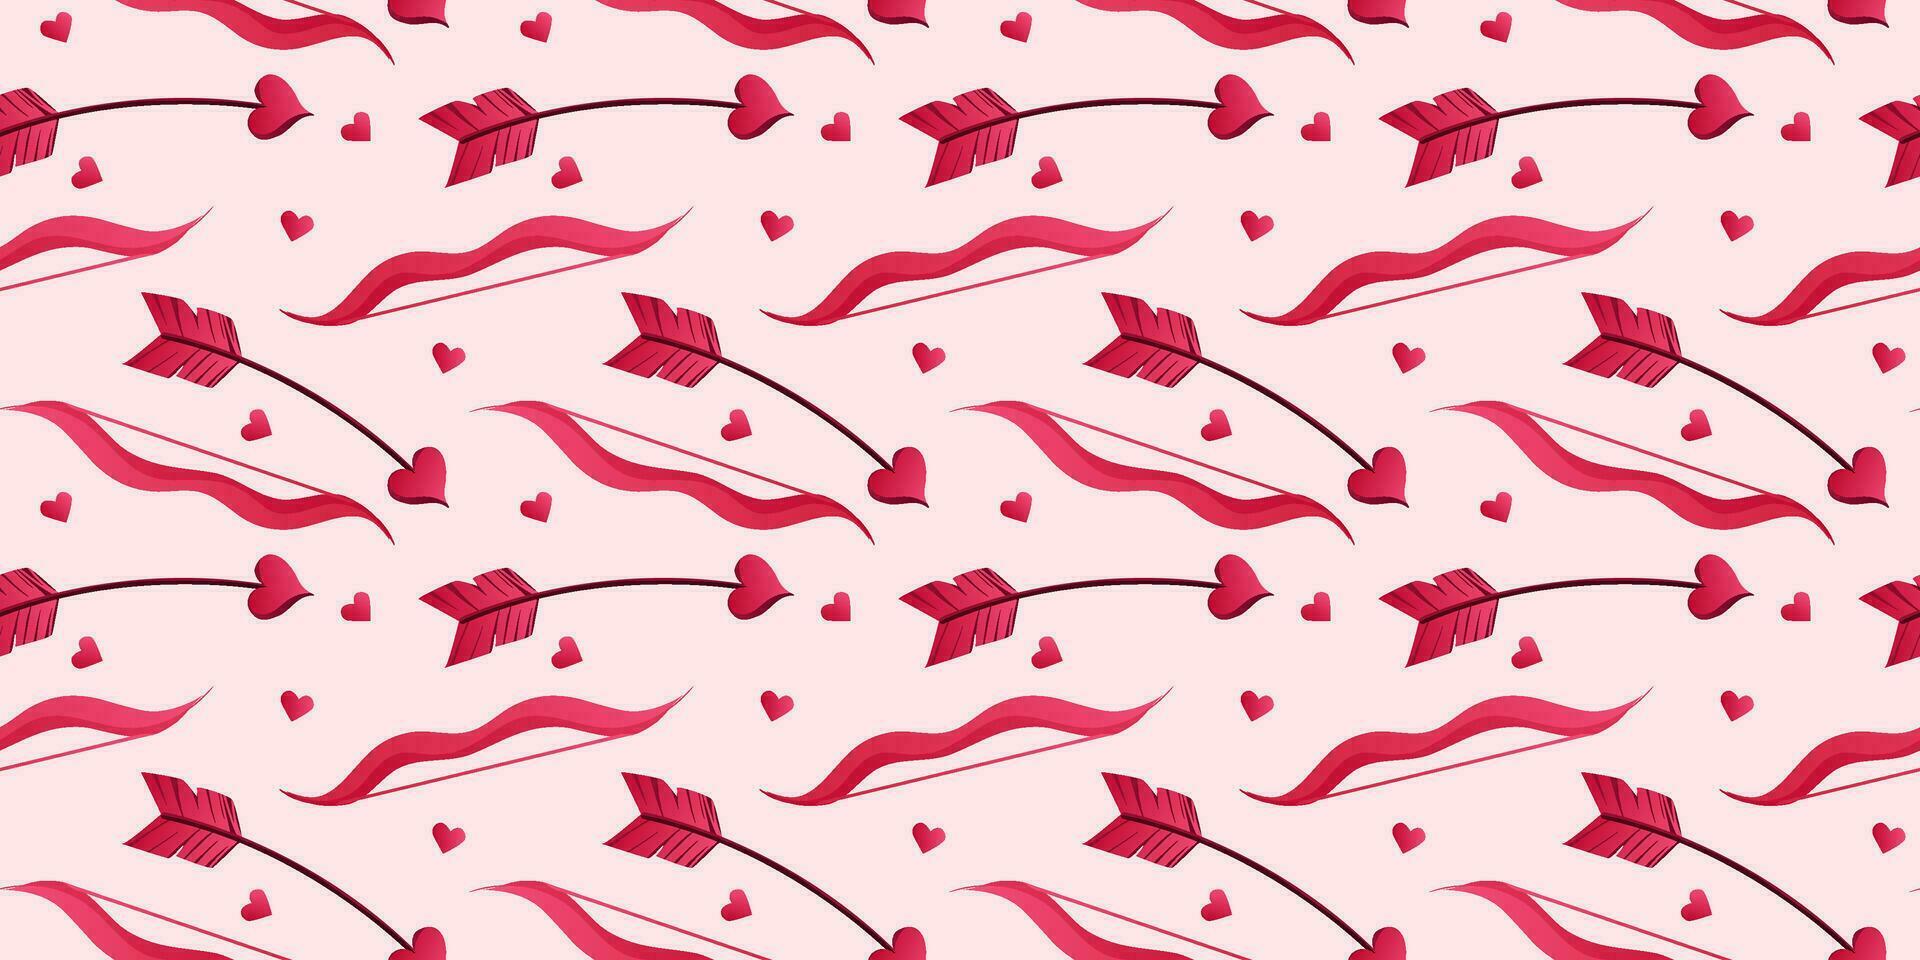 Valentine s Day seamless pattern. Cupid s trills and bow. Vector. Can be used to create charming and romantic designs for greeting cards, gift wrapping, stationery, or other love-themed materials. vector